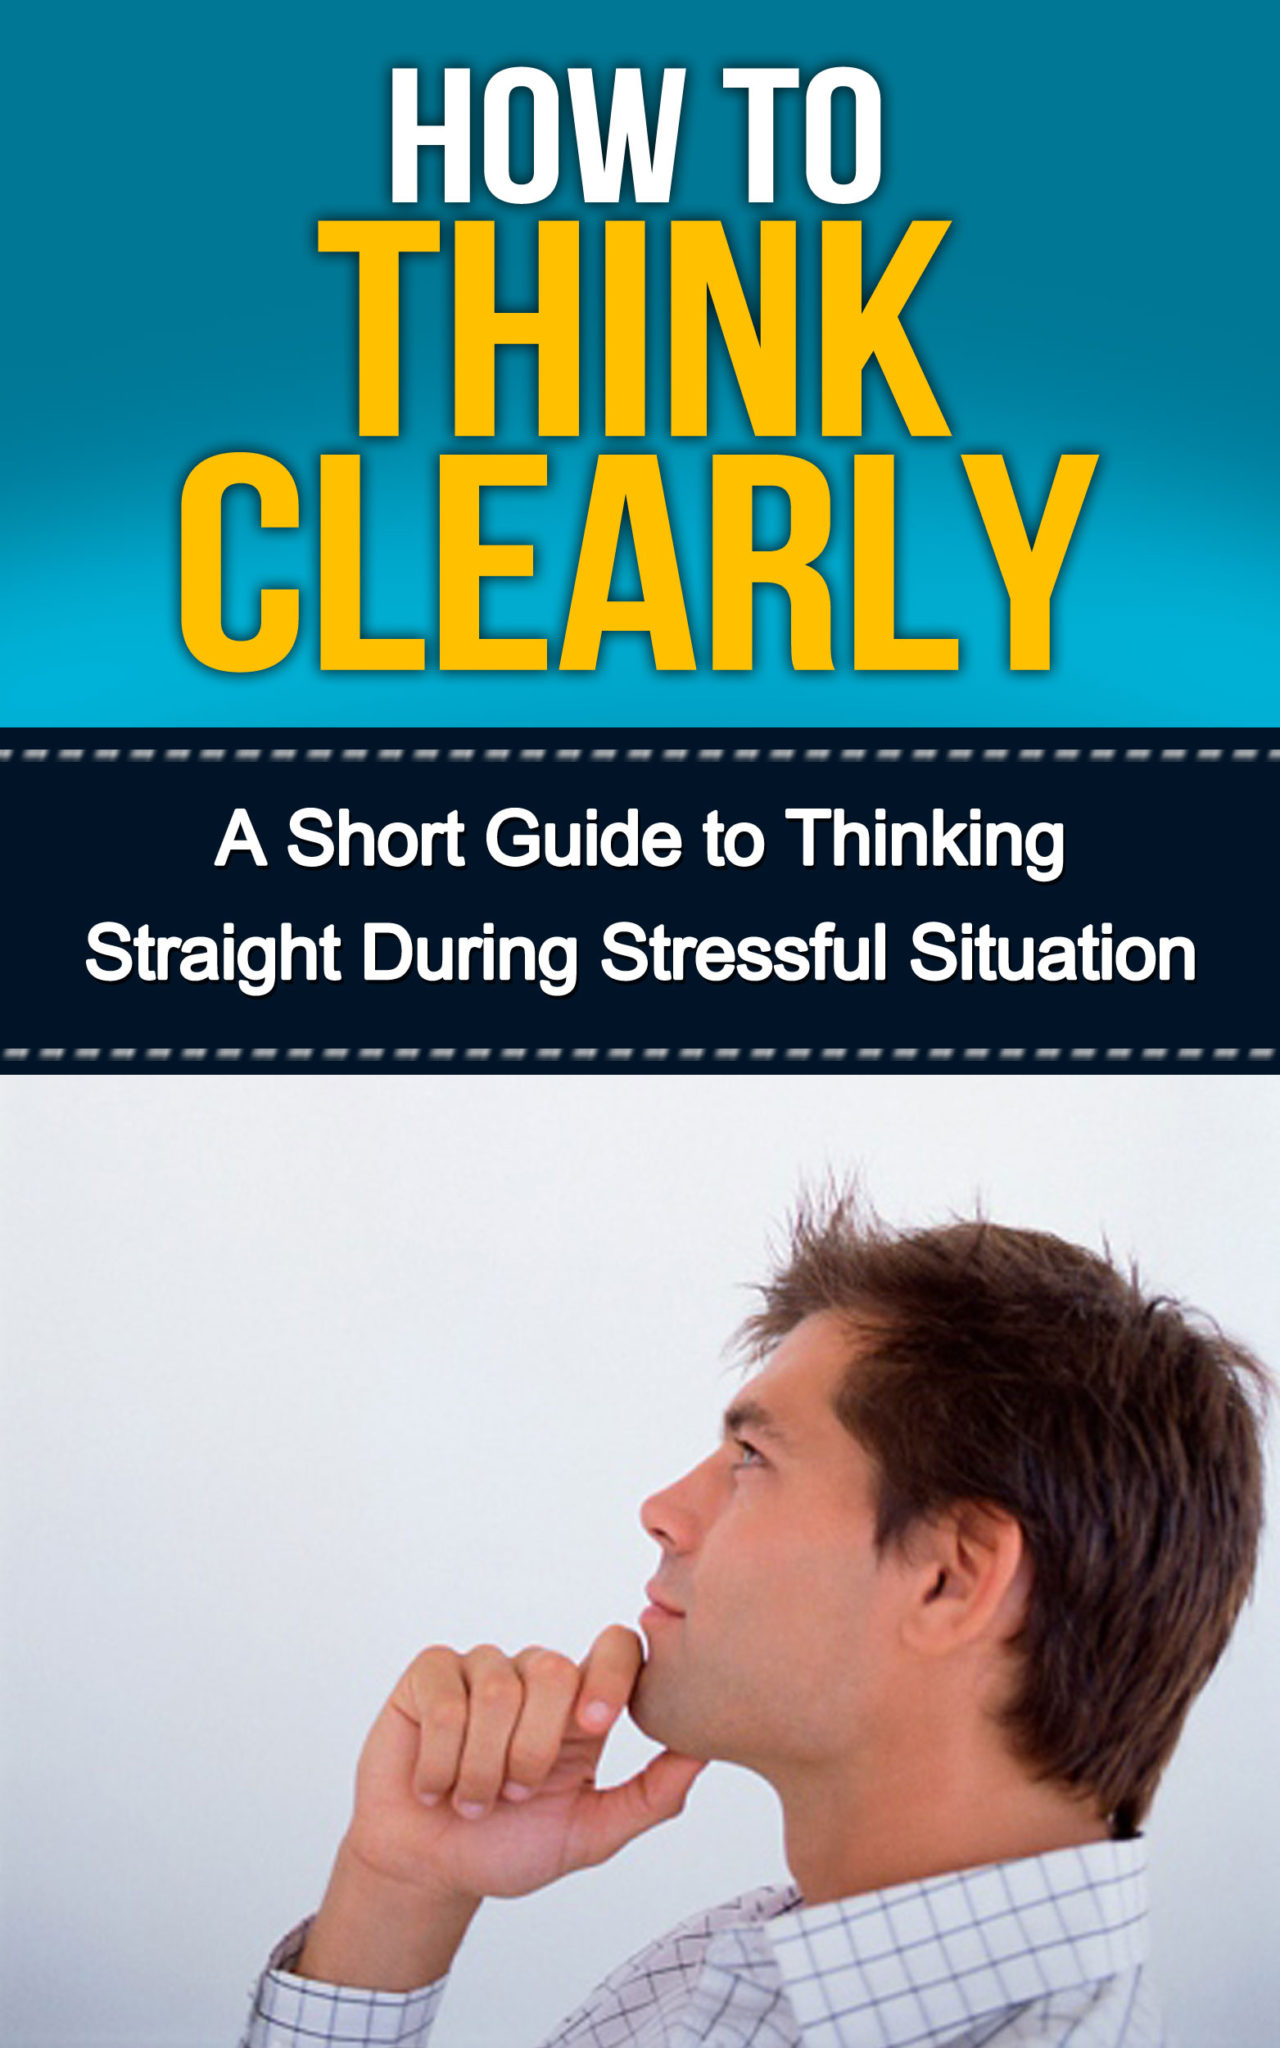 FREE: How to Think Clearly by Billy Allen